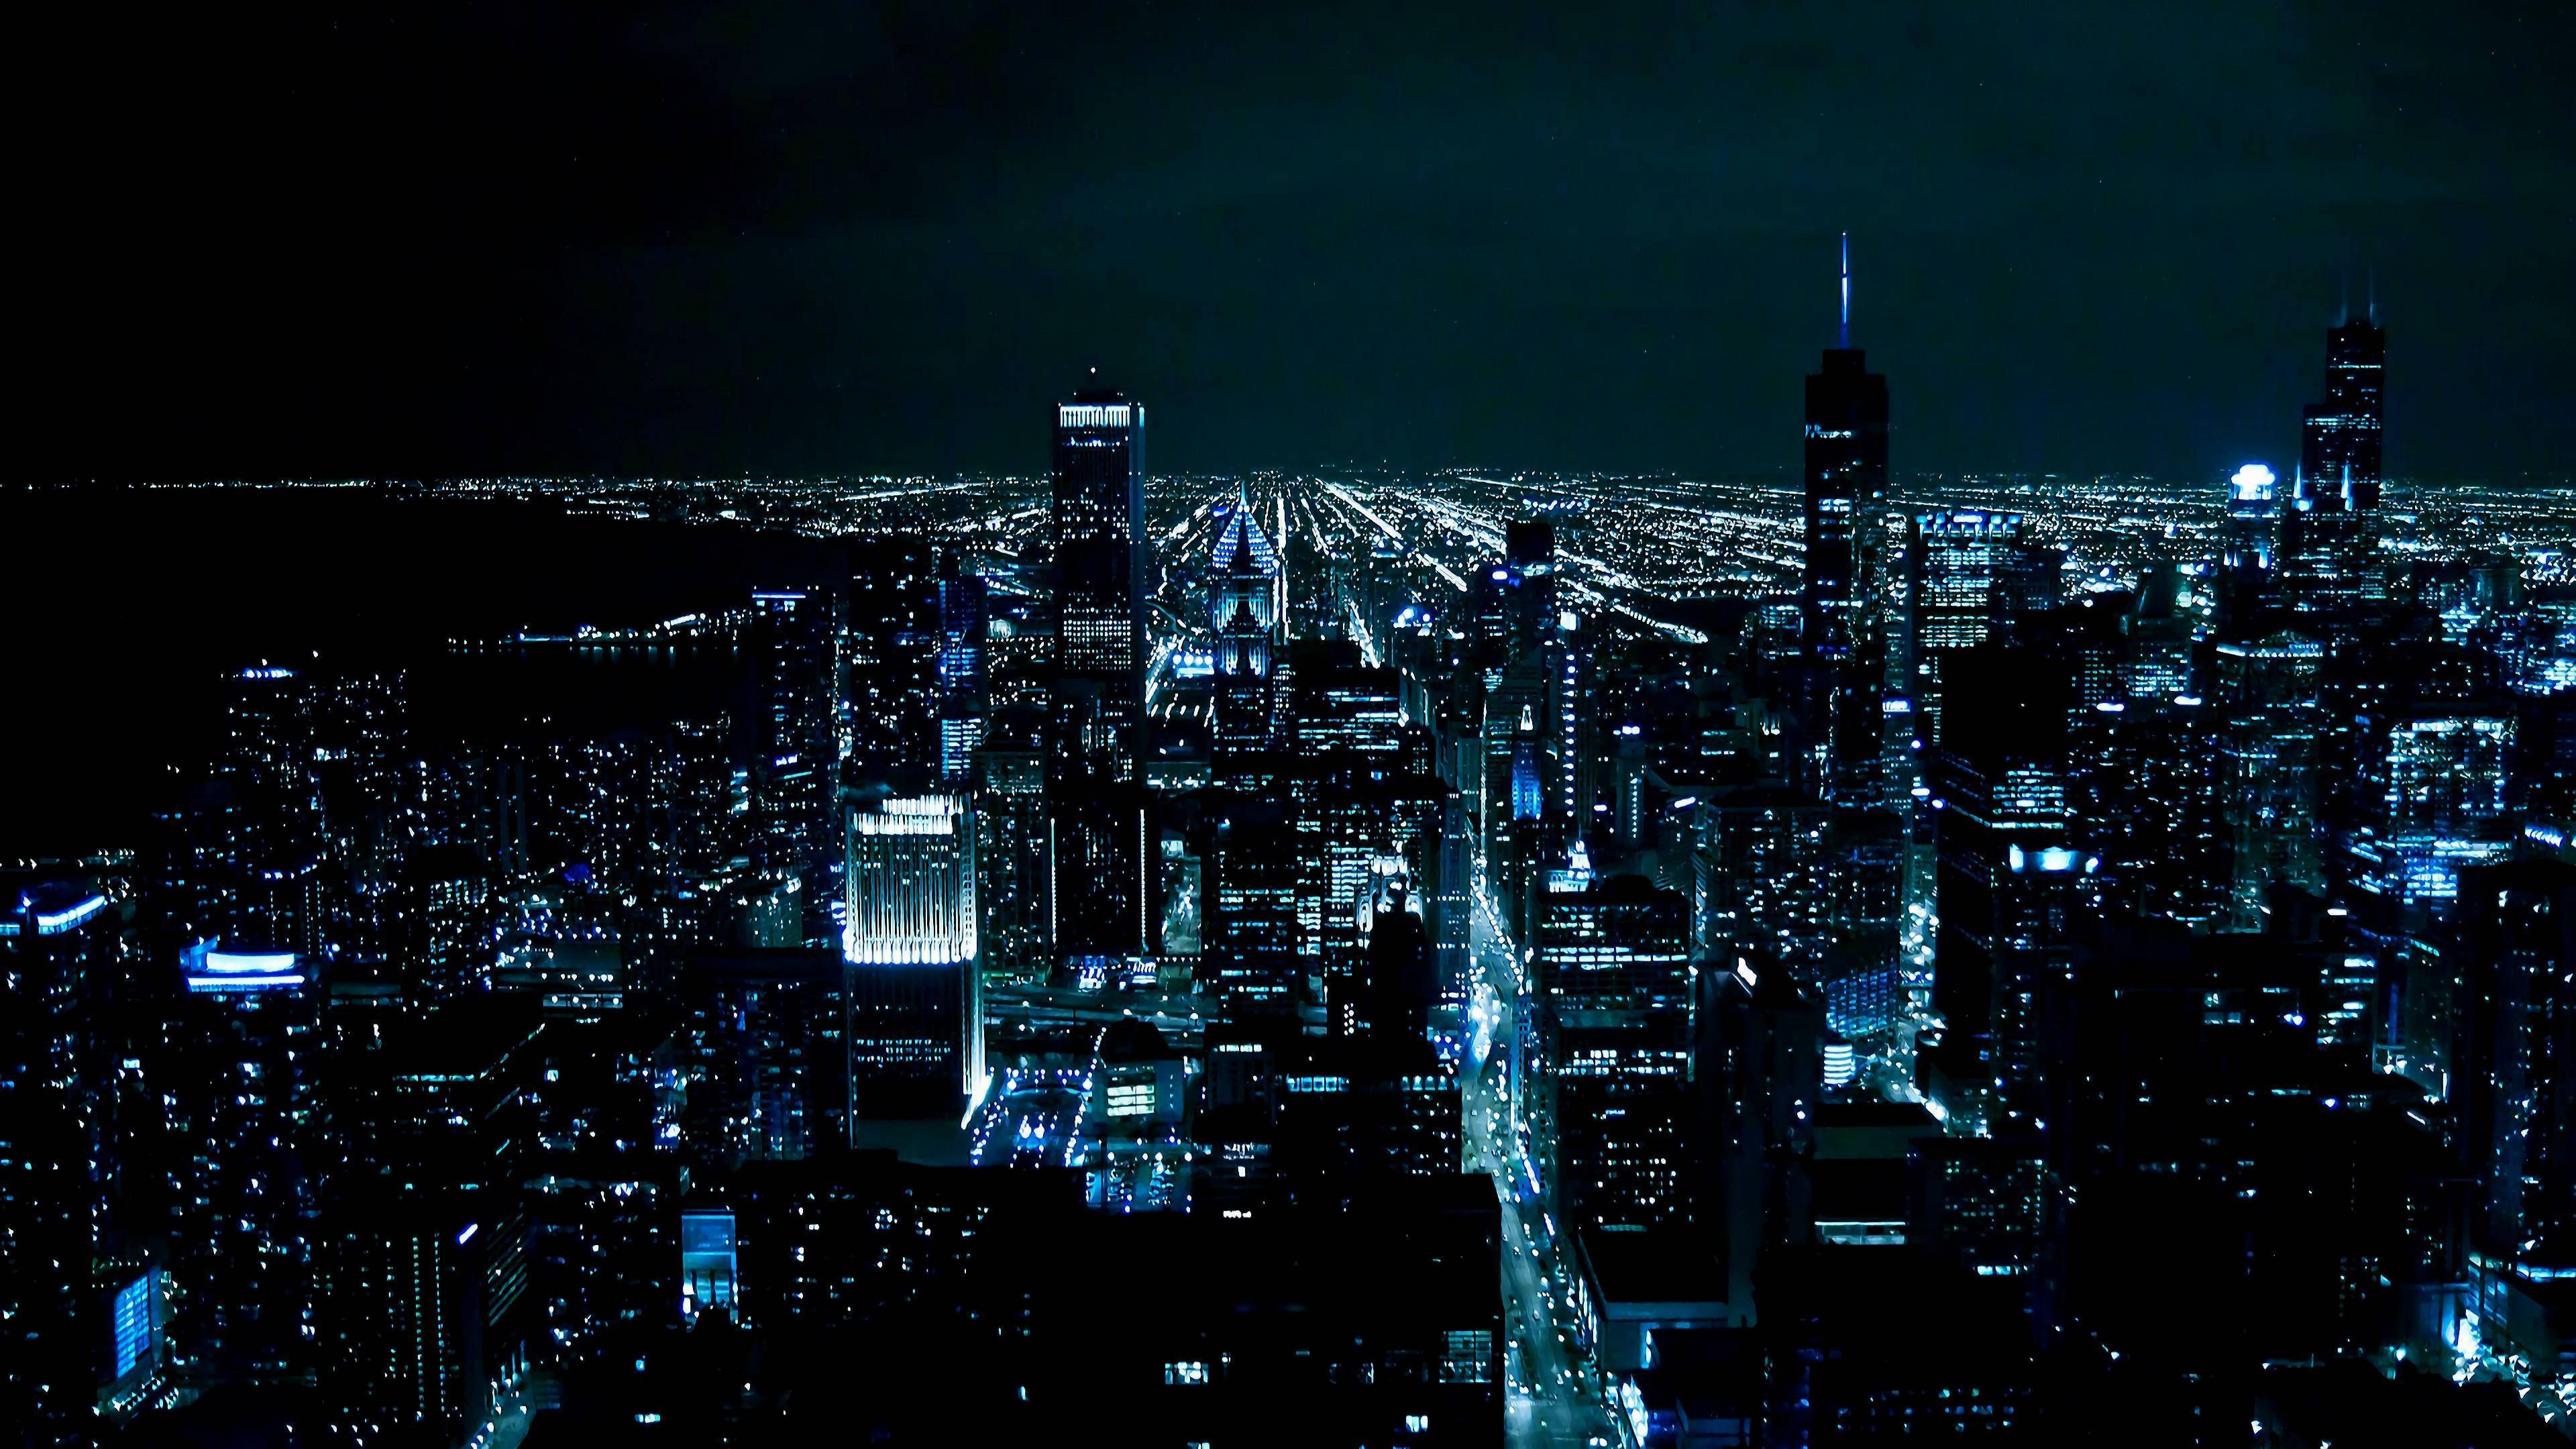 Chicago Night 8K Wallpaper, HD City 4K Wallpaper, Image, Photo and Background